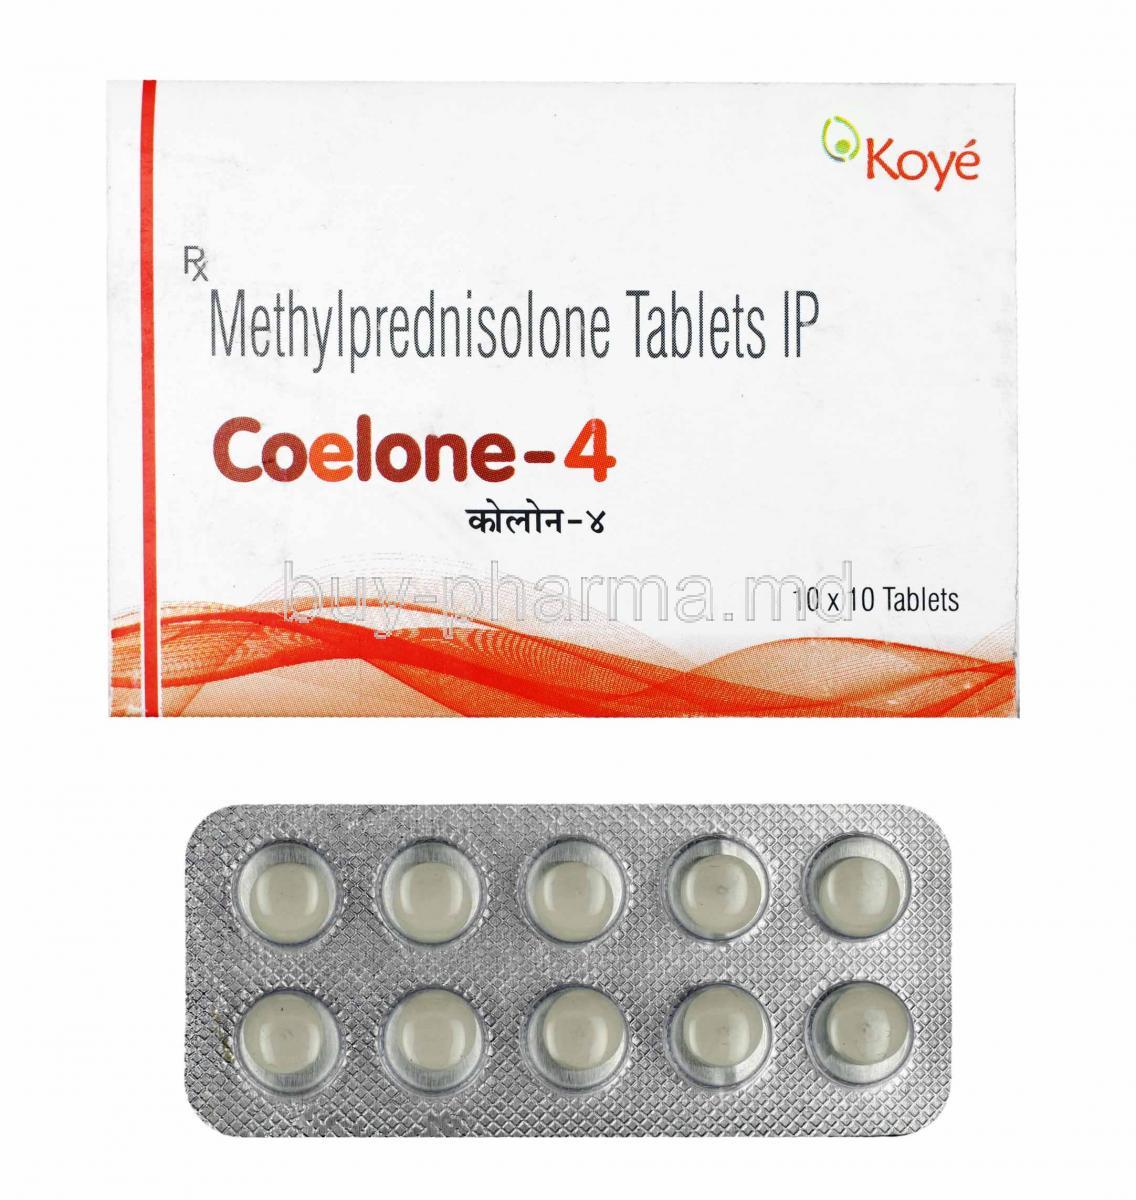 Coelone, Methylprednisolone 4mg box and tablets